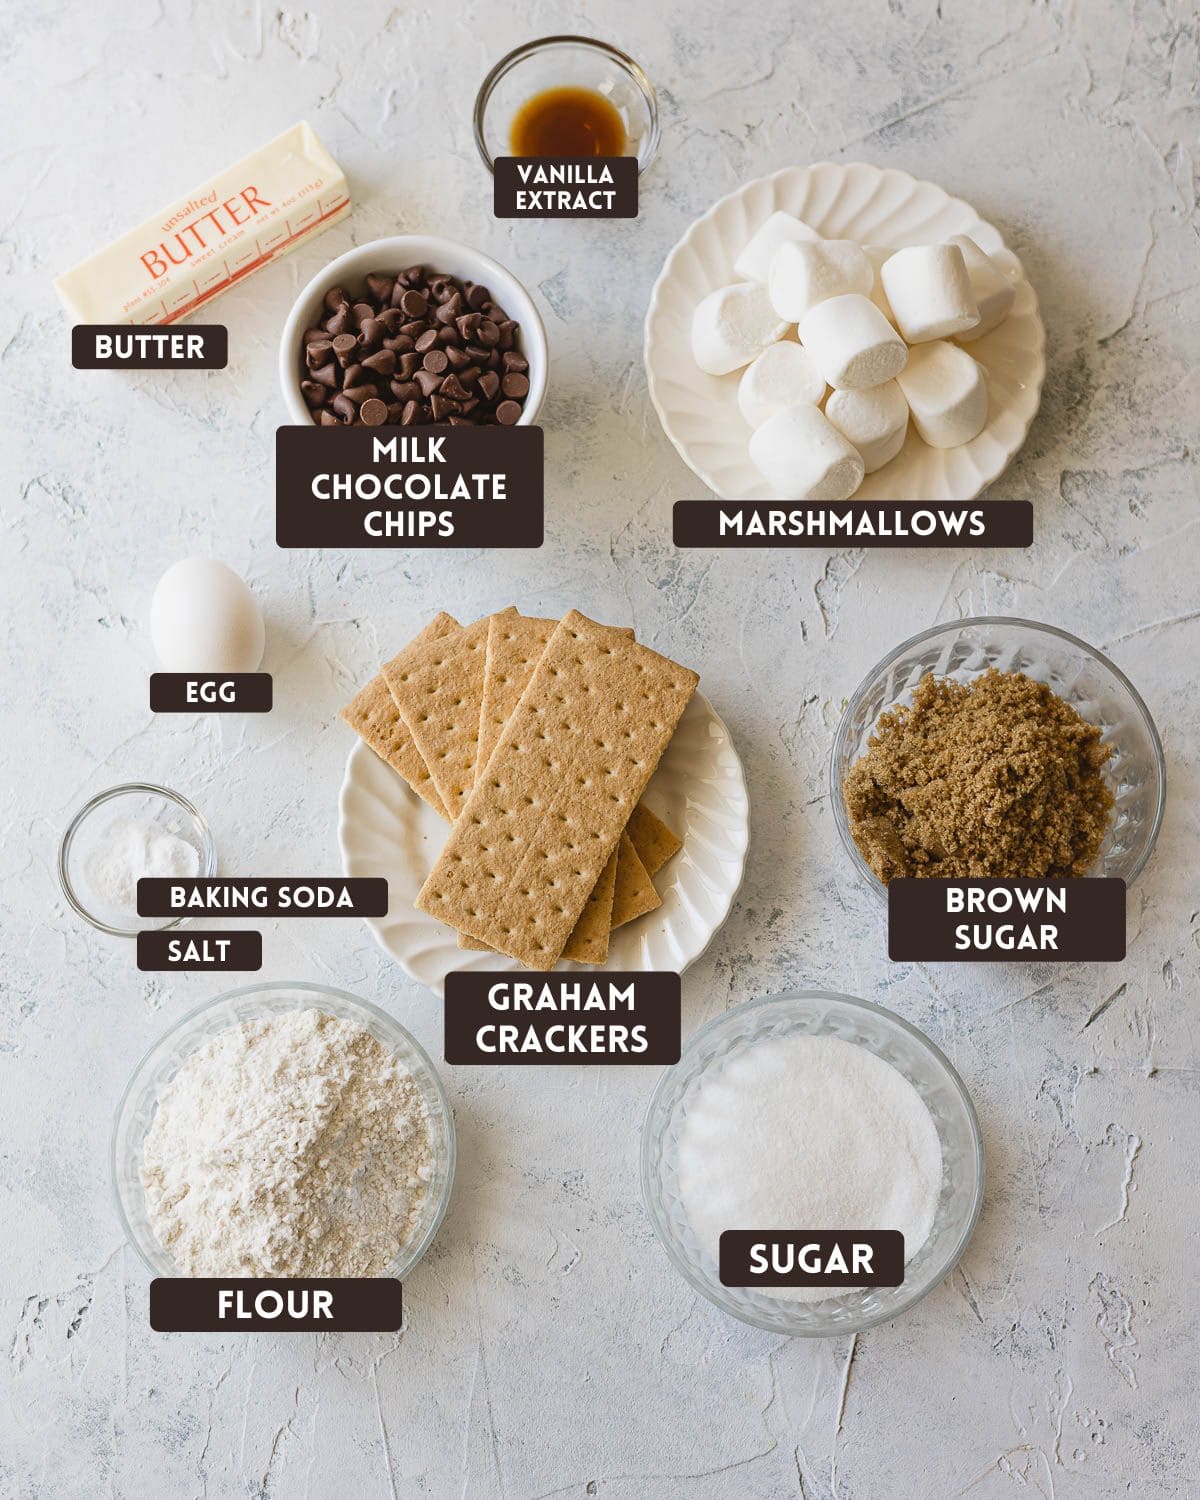 Labeled ingredients for s'mores cookies: butter, vanilla extract, milk chocolate chips, marshmallows, egg, baking soda, salt, graham crackers, brown sugar, flour, and sugar.